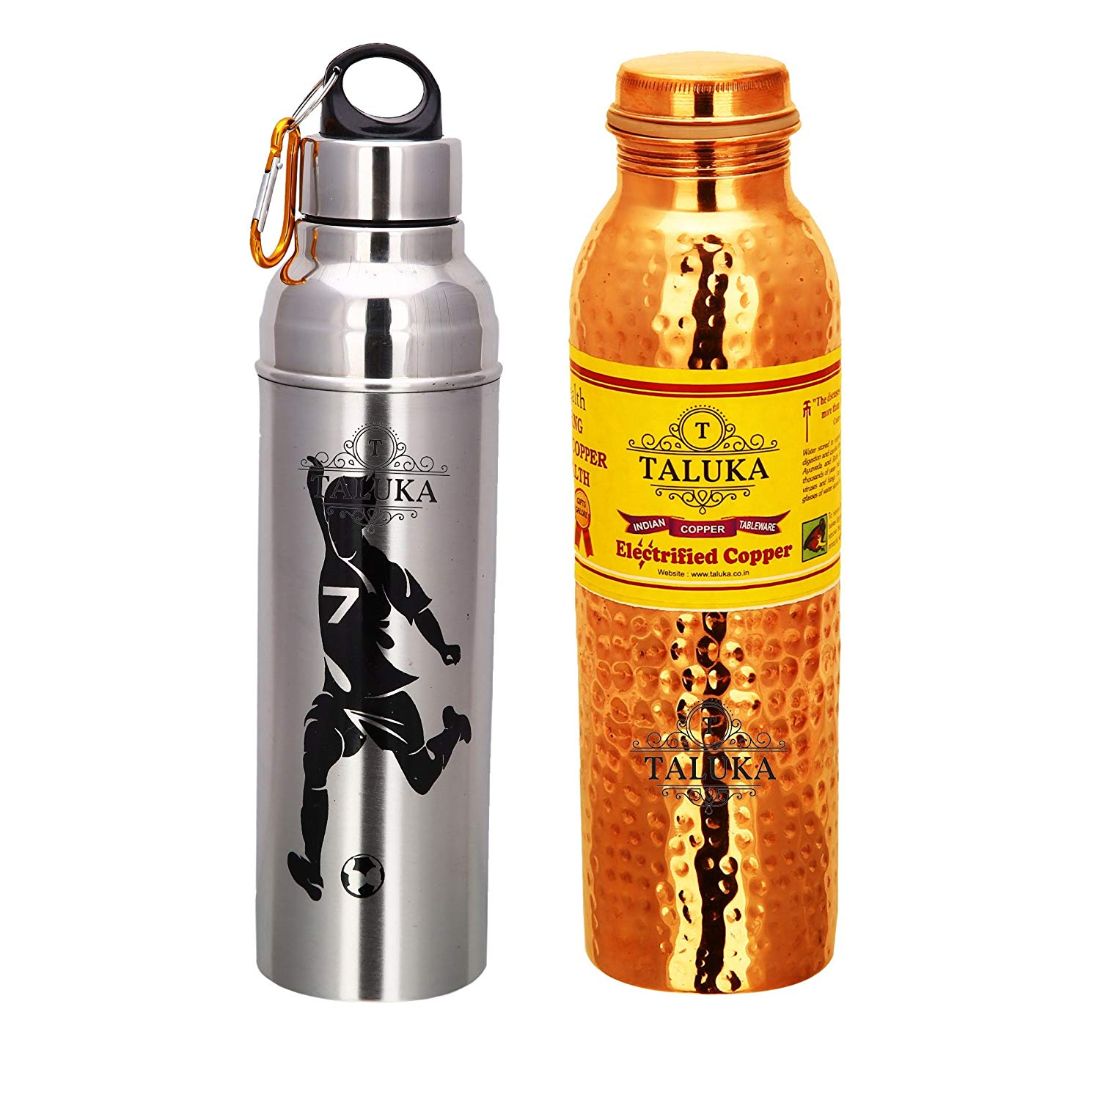 Handmade 1000 ML Hammered Copper Bottle Water With Stainless Steel Insulated Hot & Cold water Bottles (1000 ML)